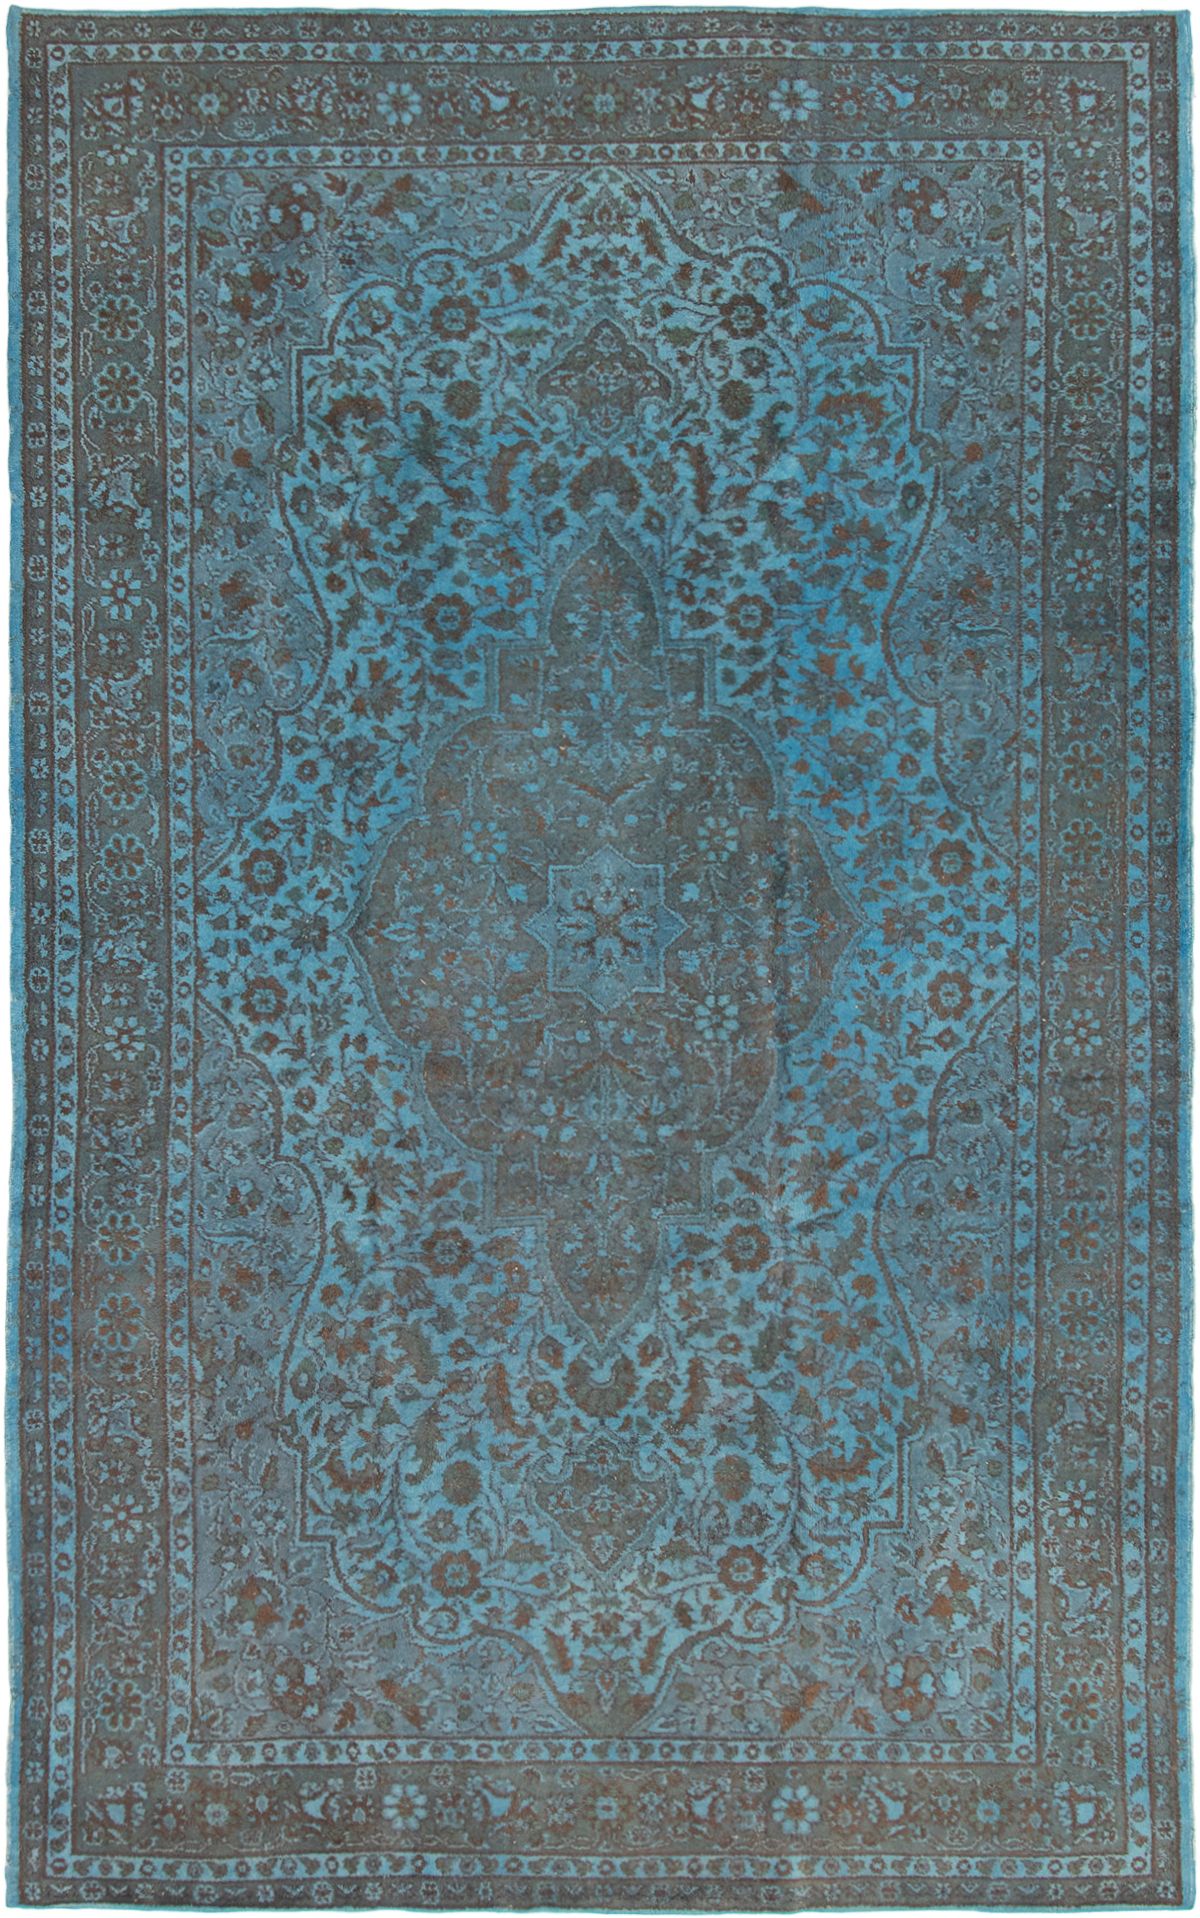 Hand-knotted Color Transition Turquoise Wool Rug 6'9" x 11'1" Size: 6'9" x 11'1"  